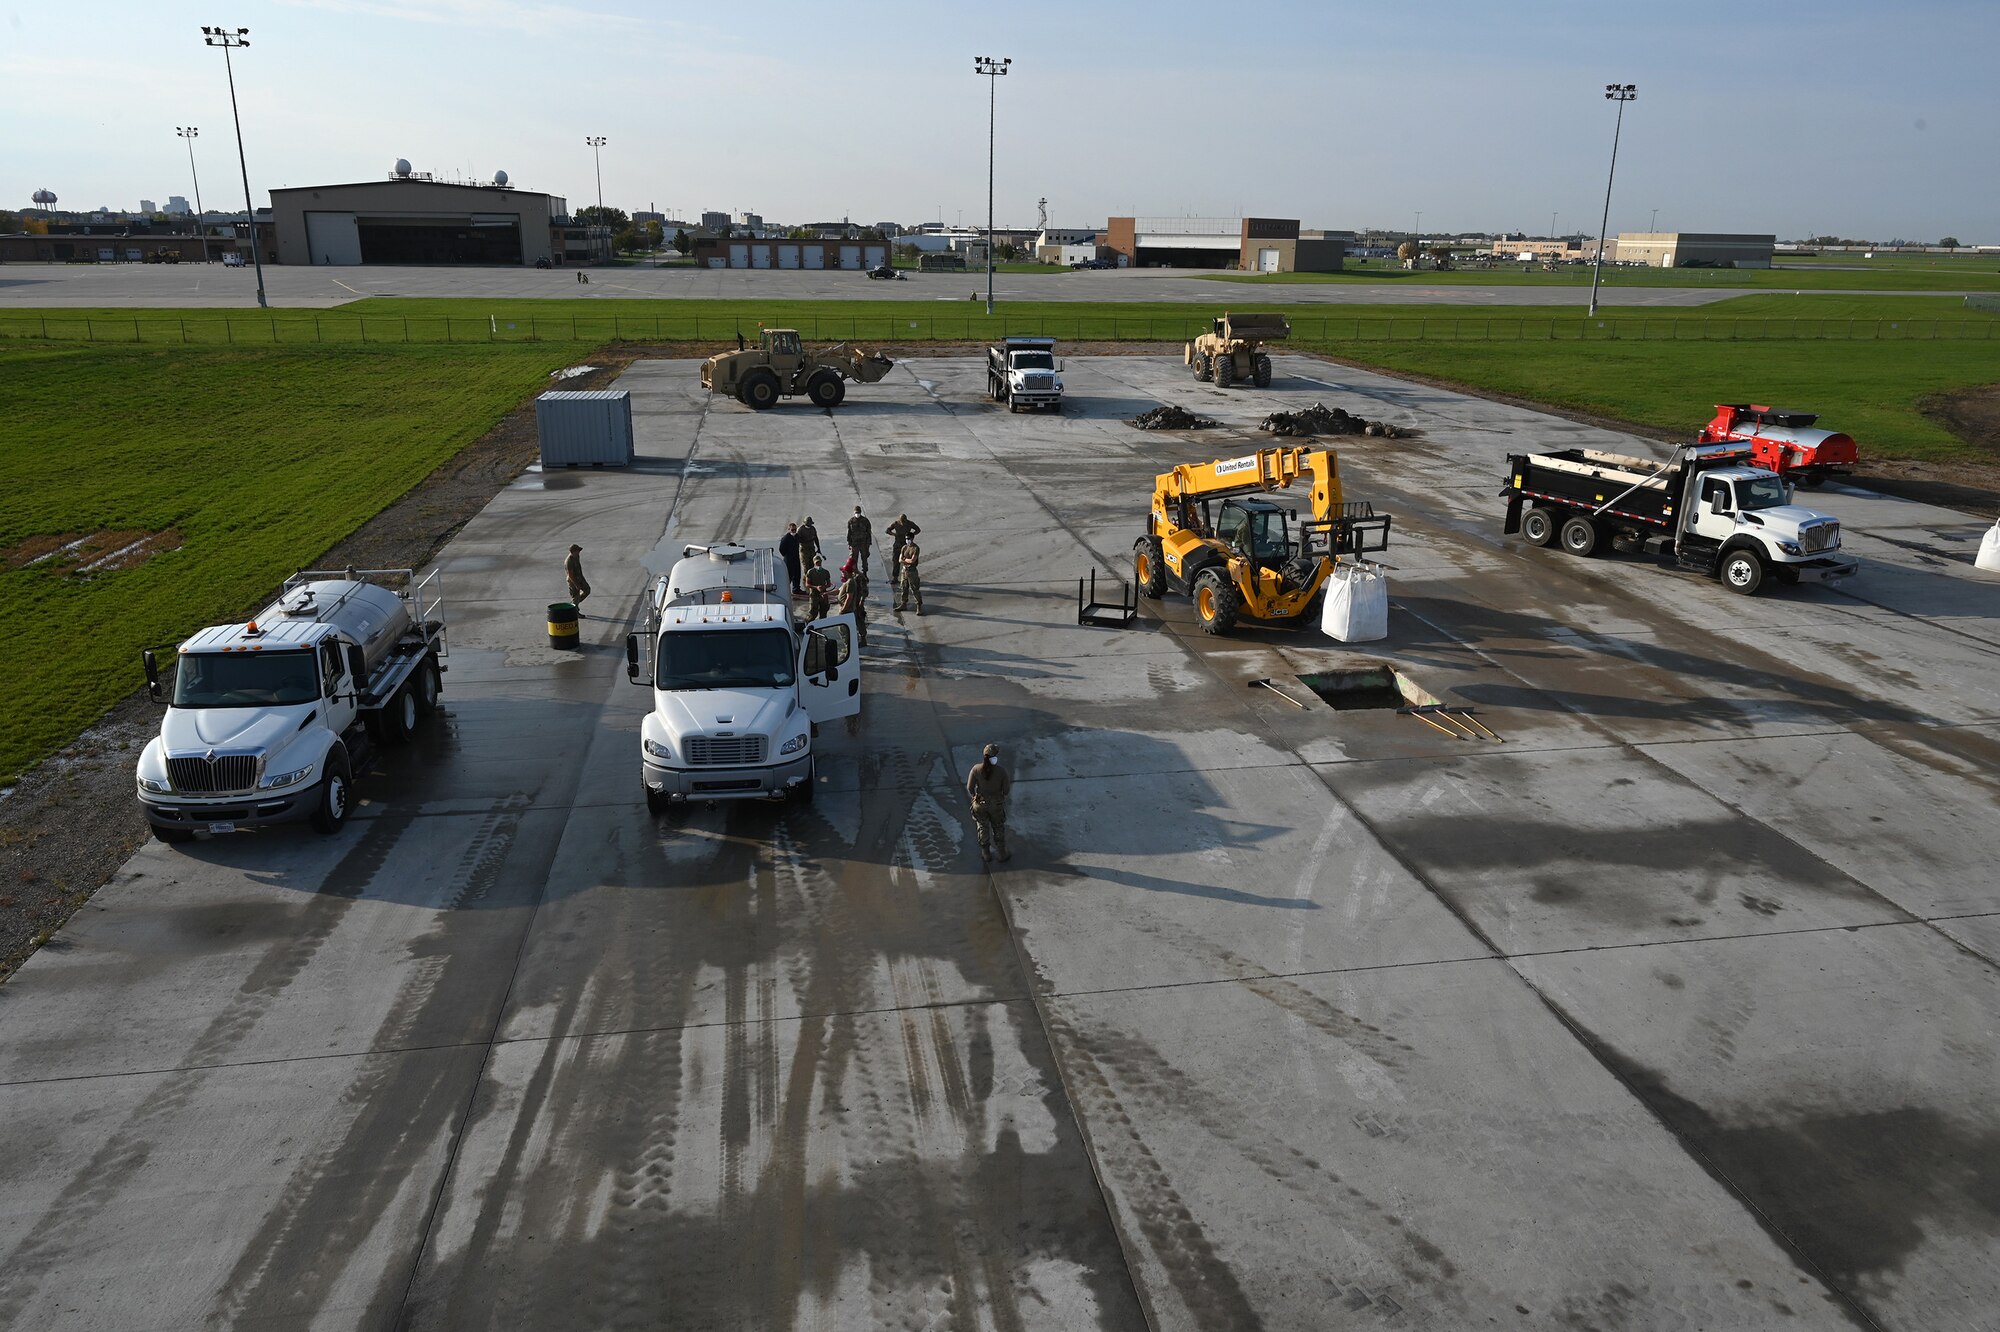 Heavy equipment and military person can be seen from an elevated view as they repair square holes in a concrete training runway at the North Dakota Air National Guard Regional Training Site, Fargo, N.D., Sept. 30, 2021.